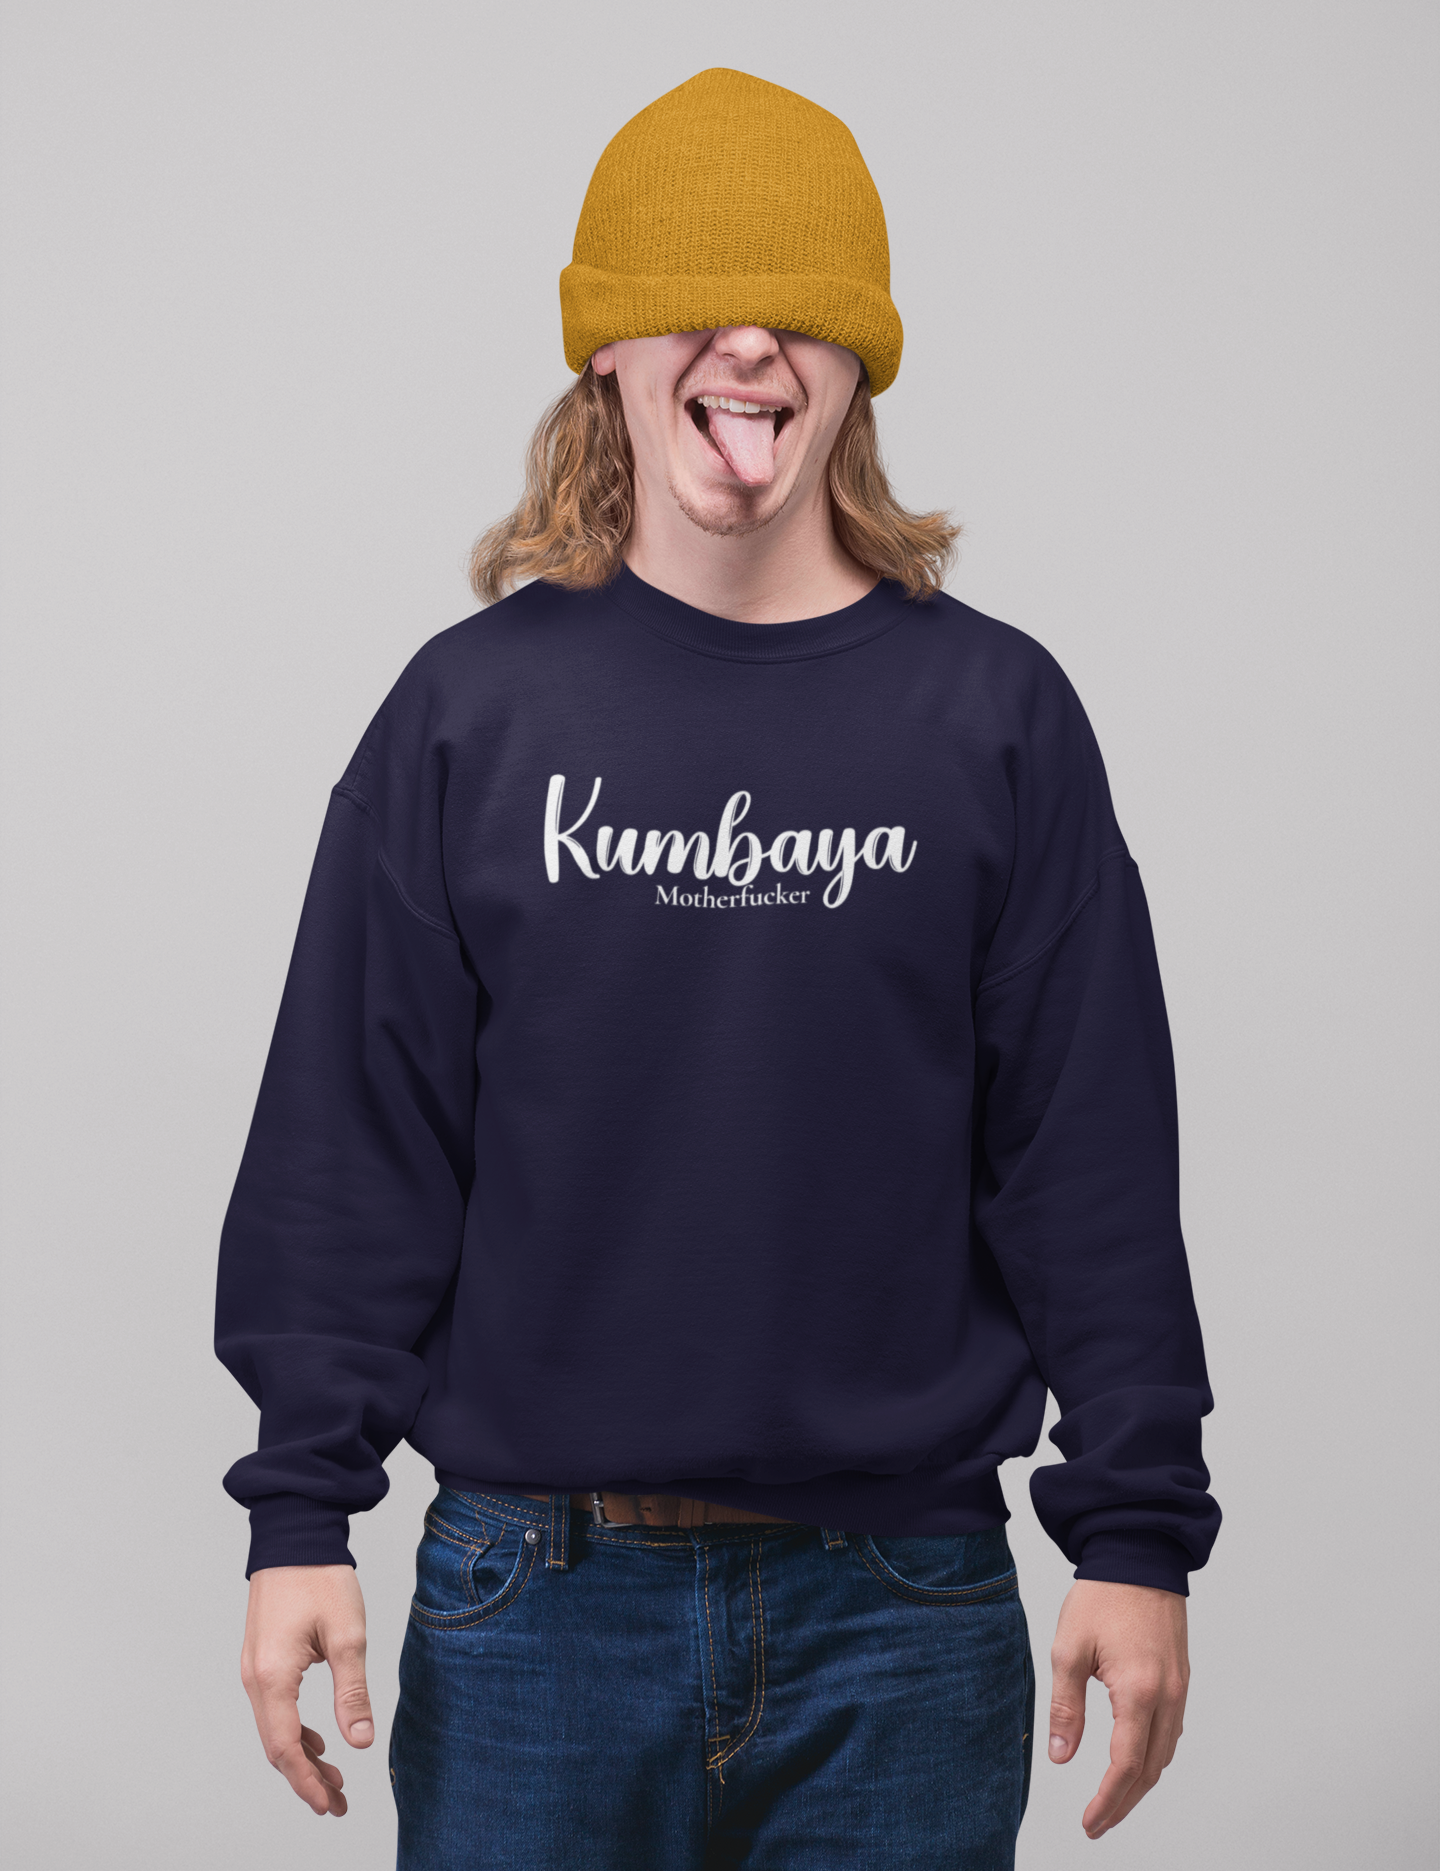 sweatshirt-mockup-of-a-man-covering-his-eyes-with-a-beanie-and-showing-his-tongue-23095-2.png